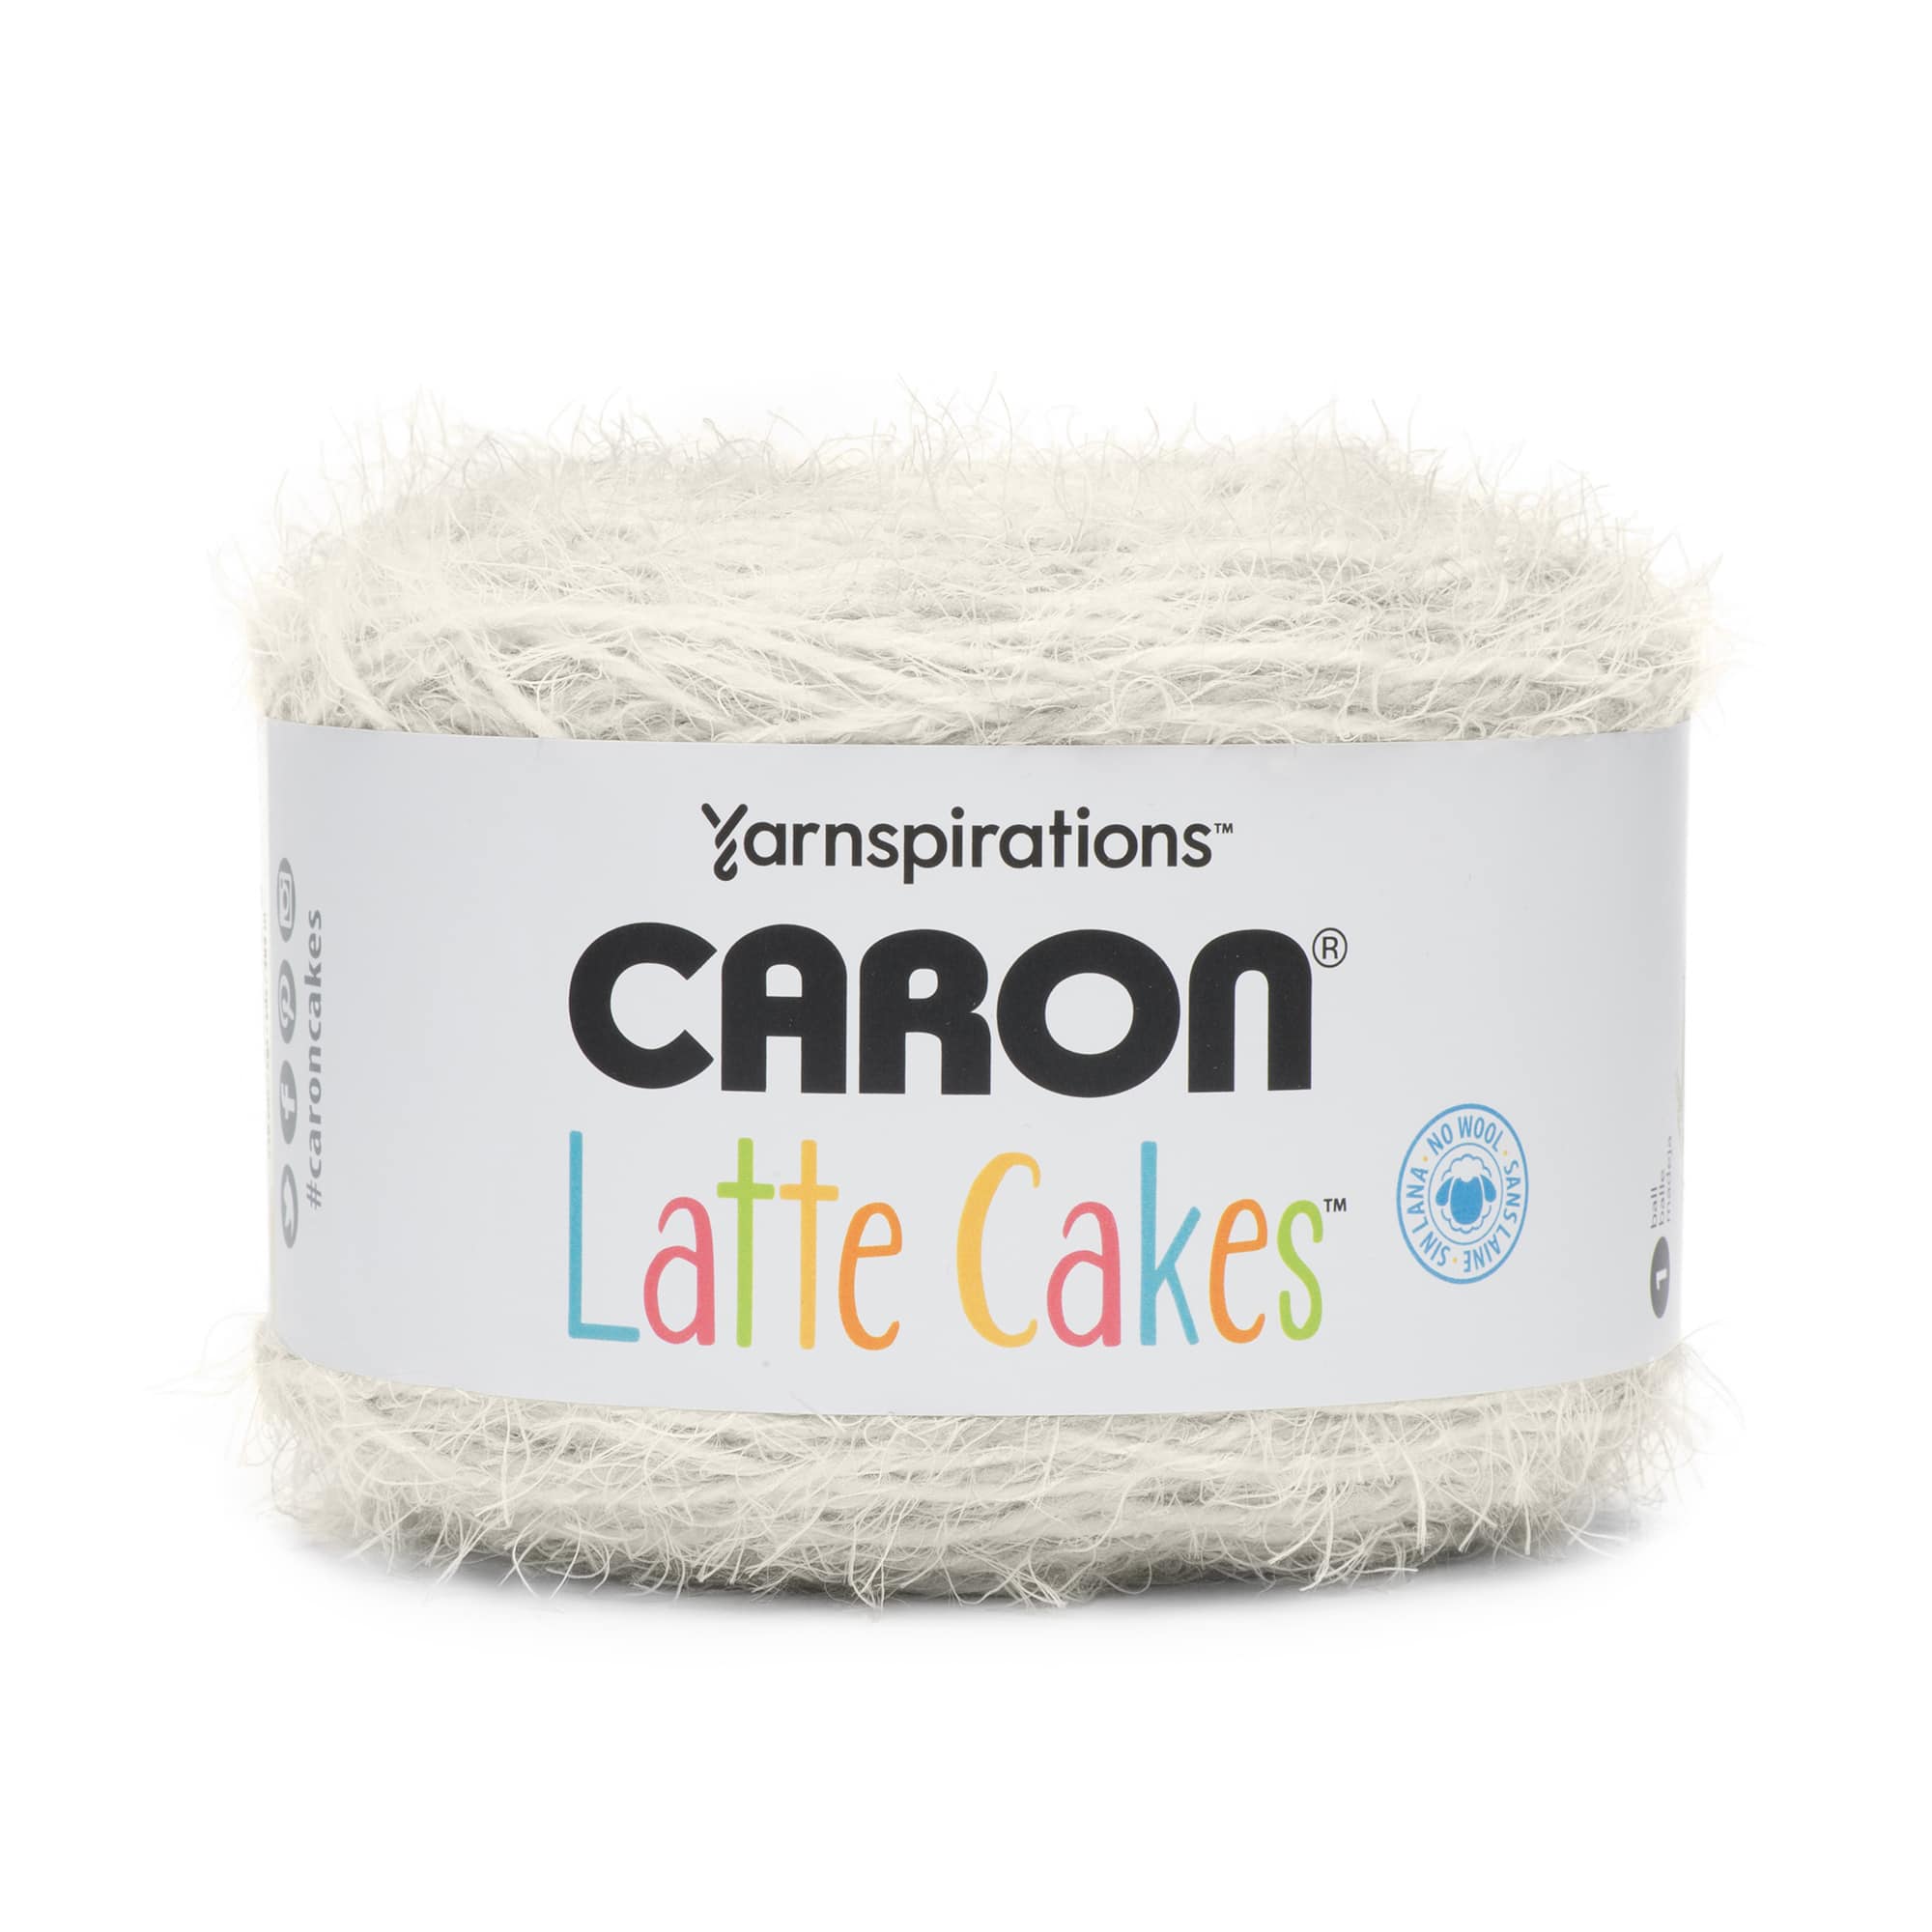 Caron Latte Cakes inspiration with 25 Projects